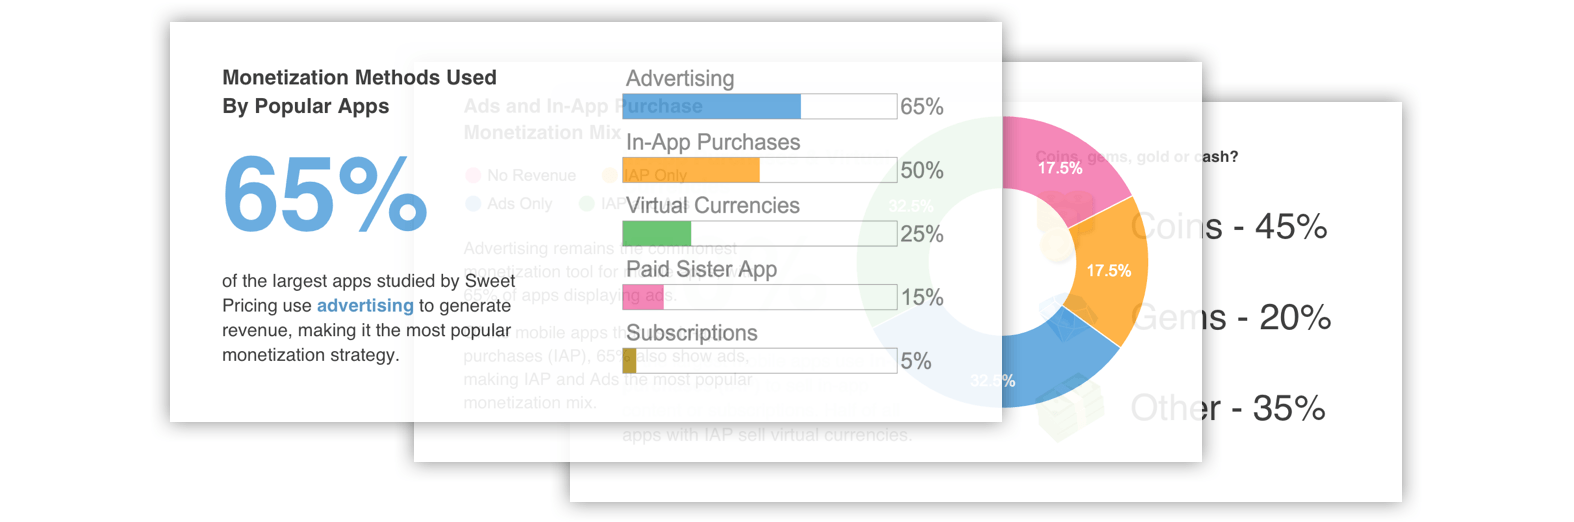 Most Popular Mobile Apps Logo - App Monetization: 7 Stats From a Study of Popular Mobile Apps